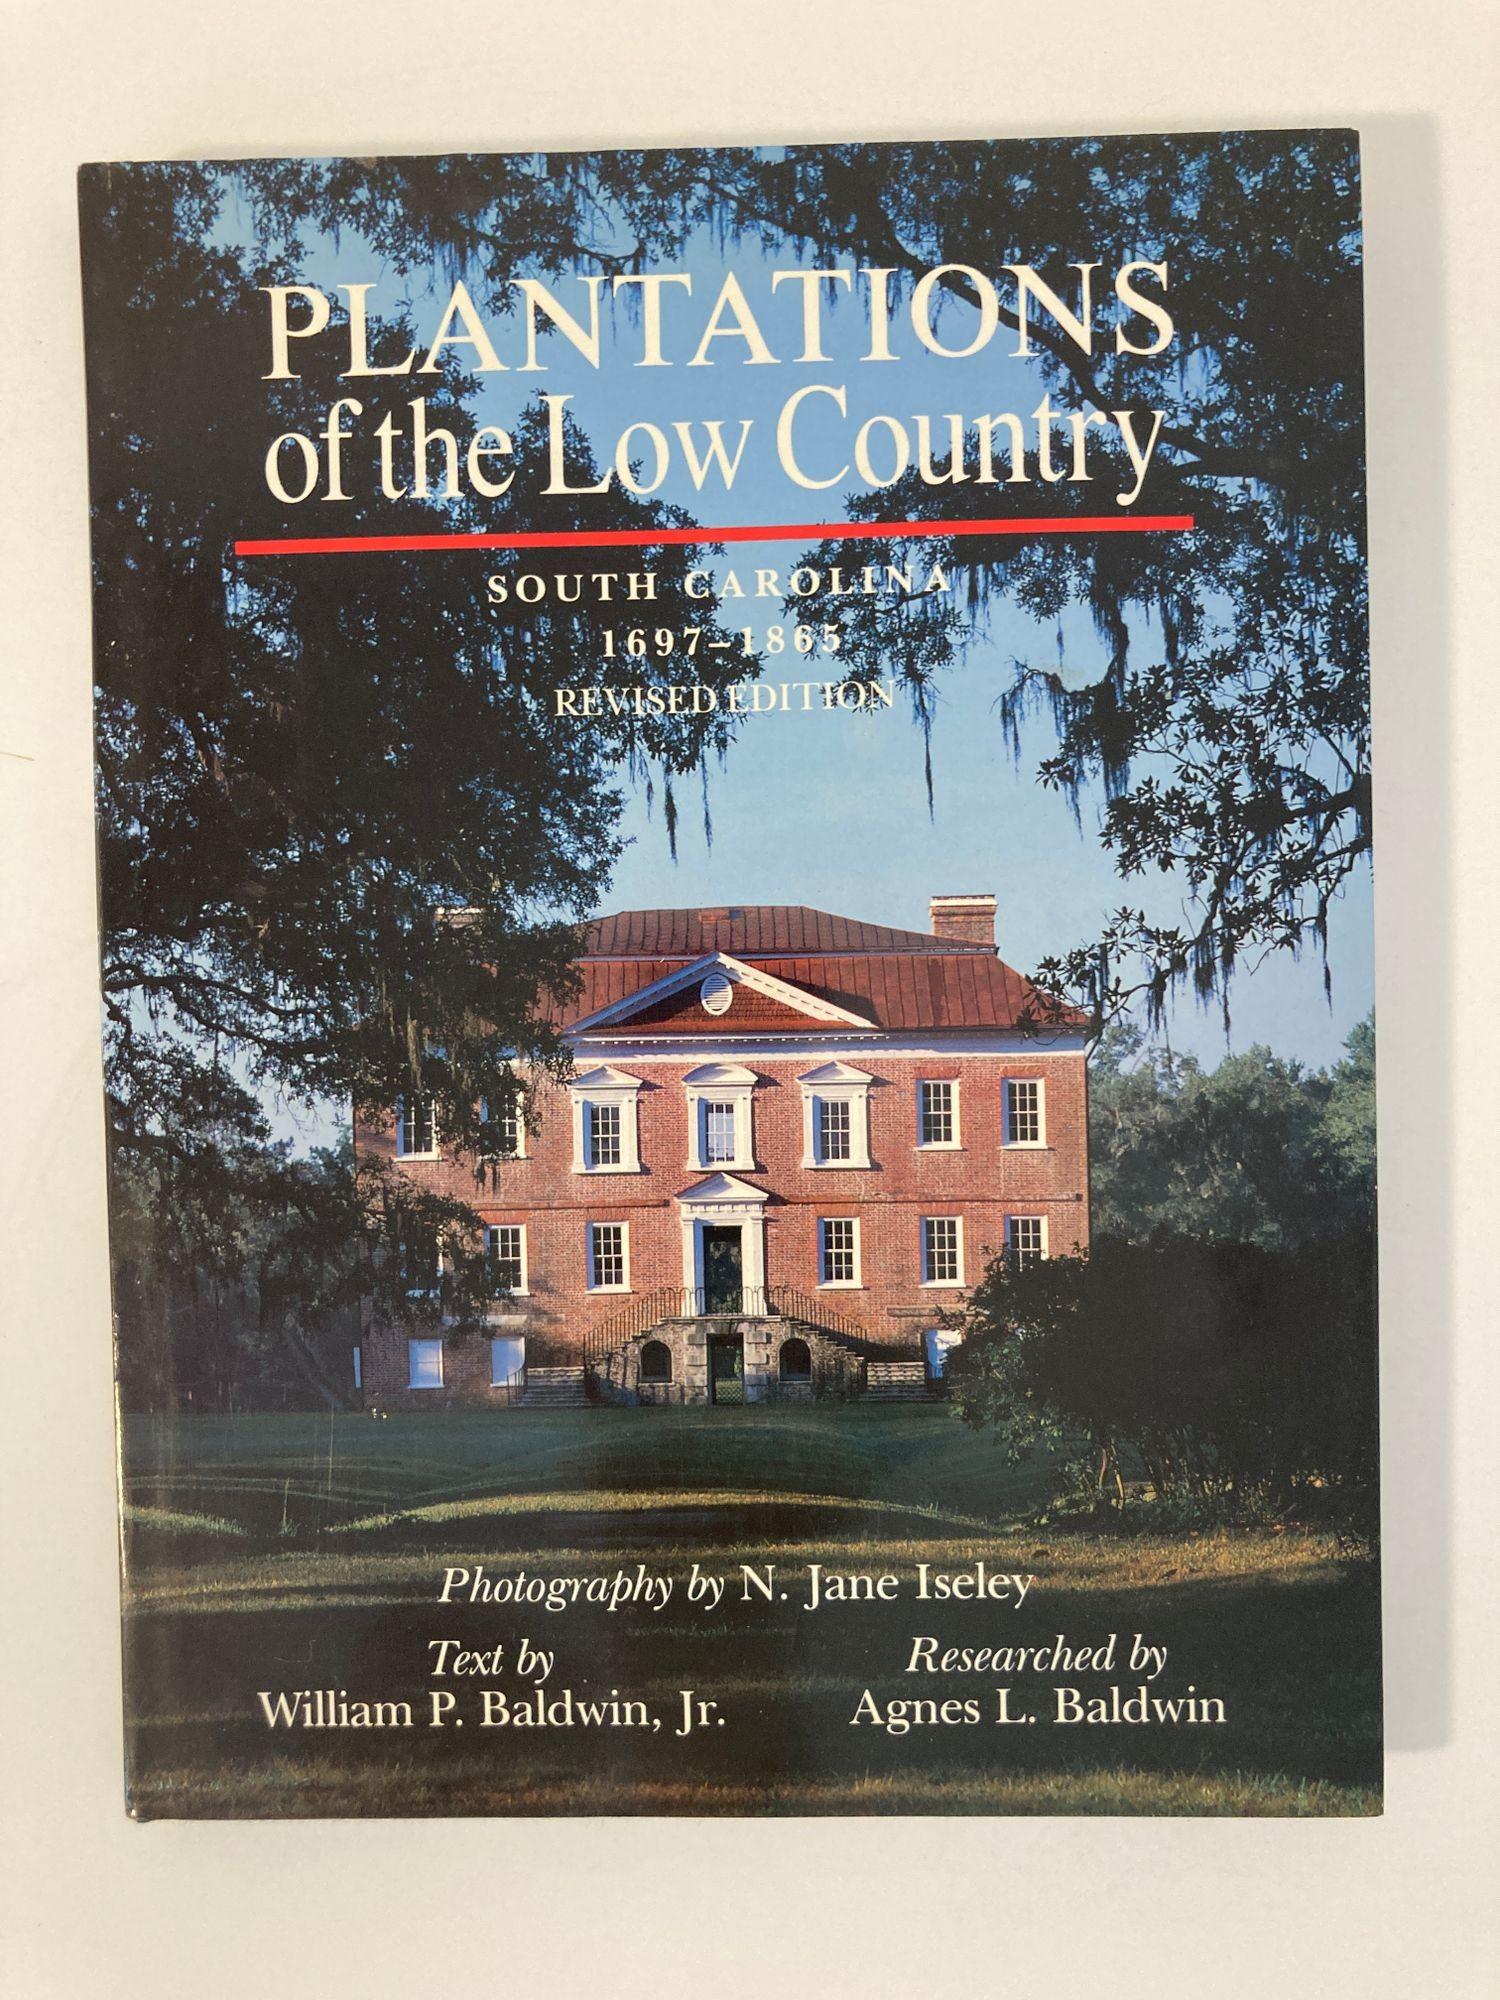 Plantations of the Low Country: South Carolina 1697-1865 Hardcover Book.
Large coffee table book by Agnes Leland Baldwin and William P. Baldwin
Architecture has been defined as 